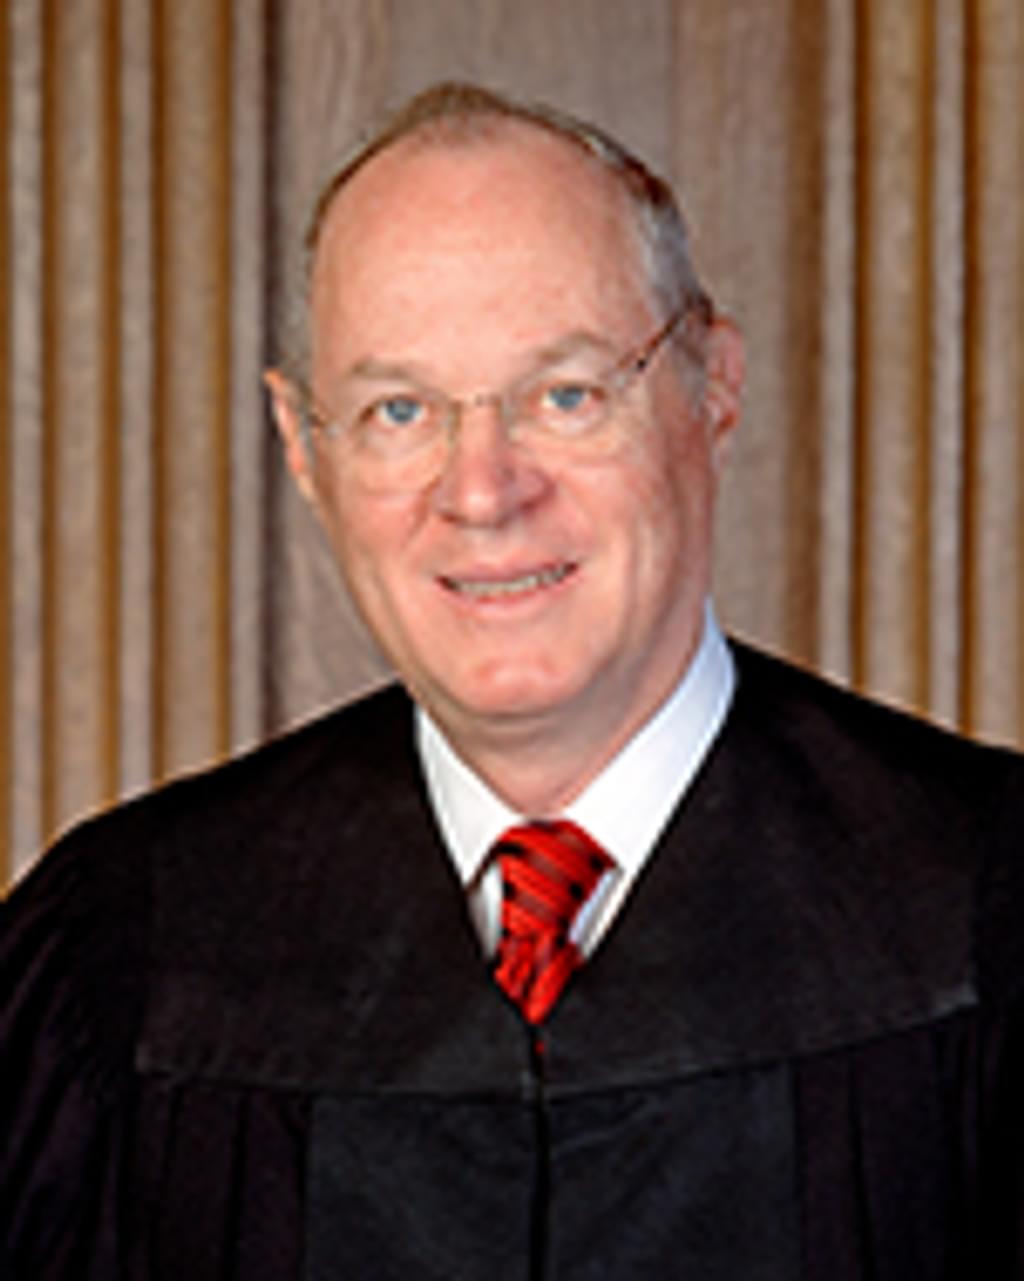 Supreme Court Justice Anthony Kennedy, Author of Key Death-Penalty Decisions, Retires